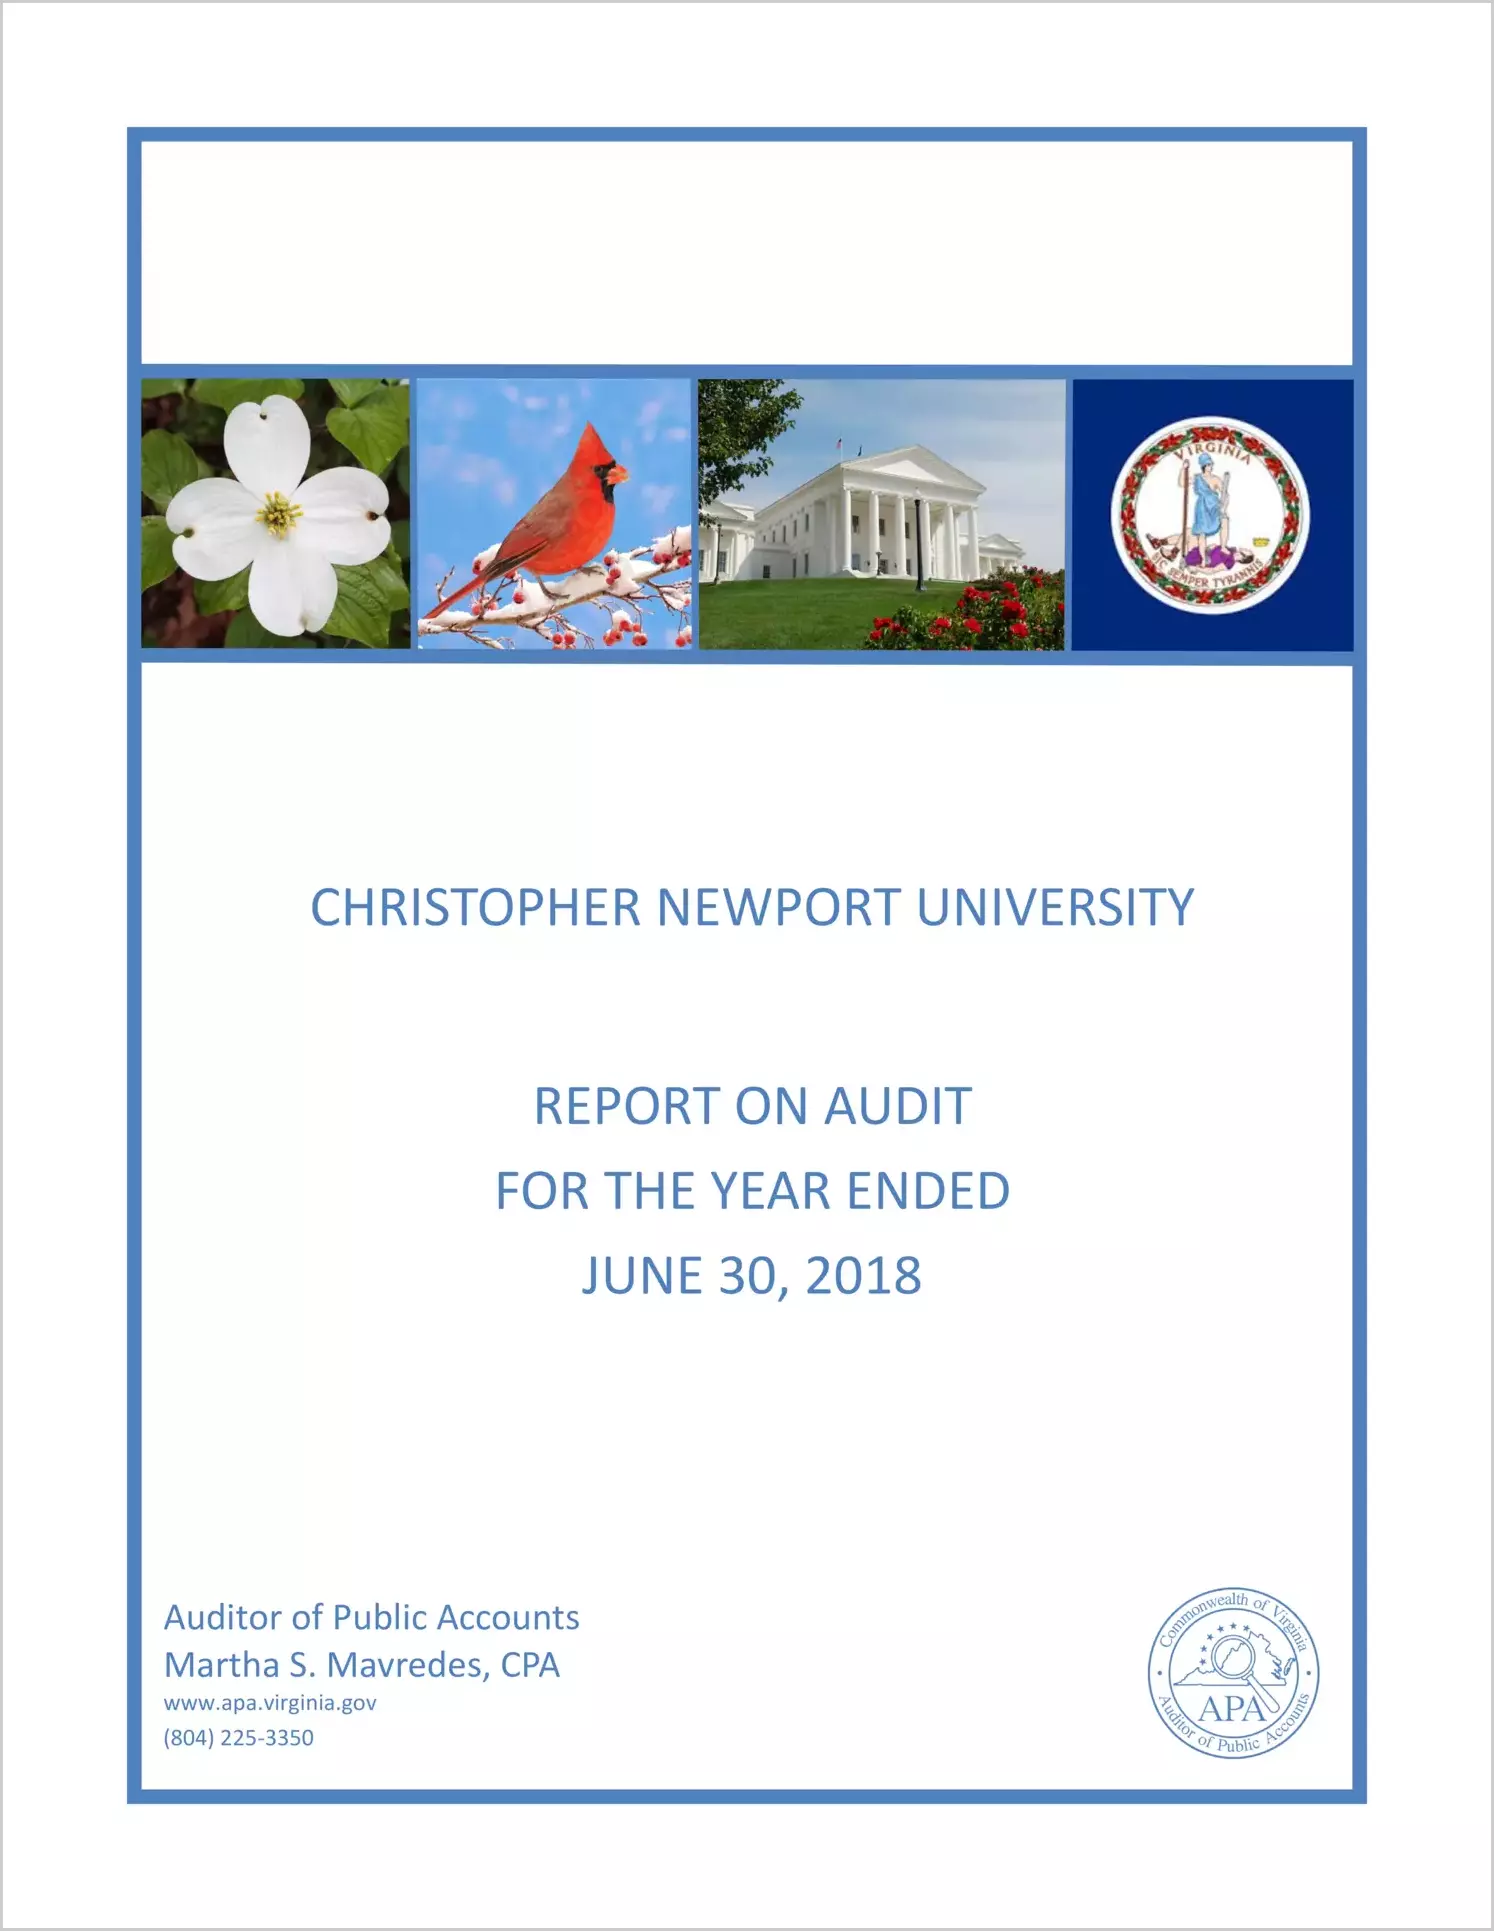 Christopher Newport University for the year ended June 30, 2018